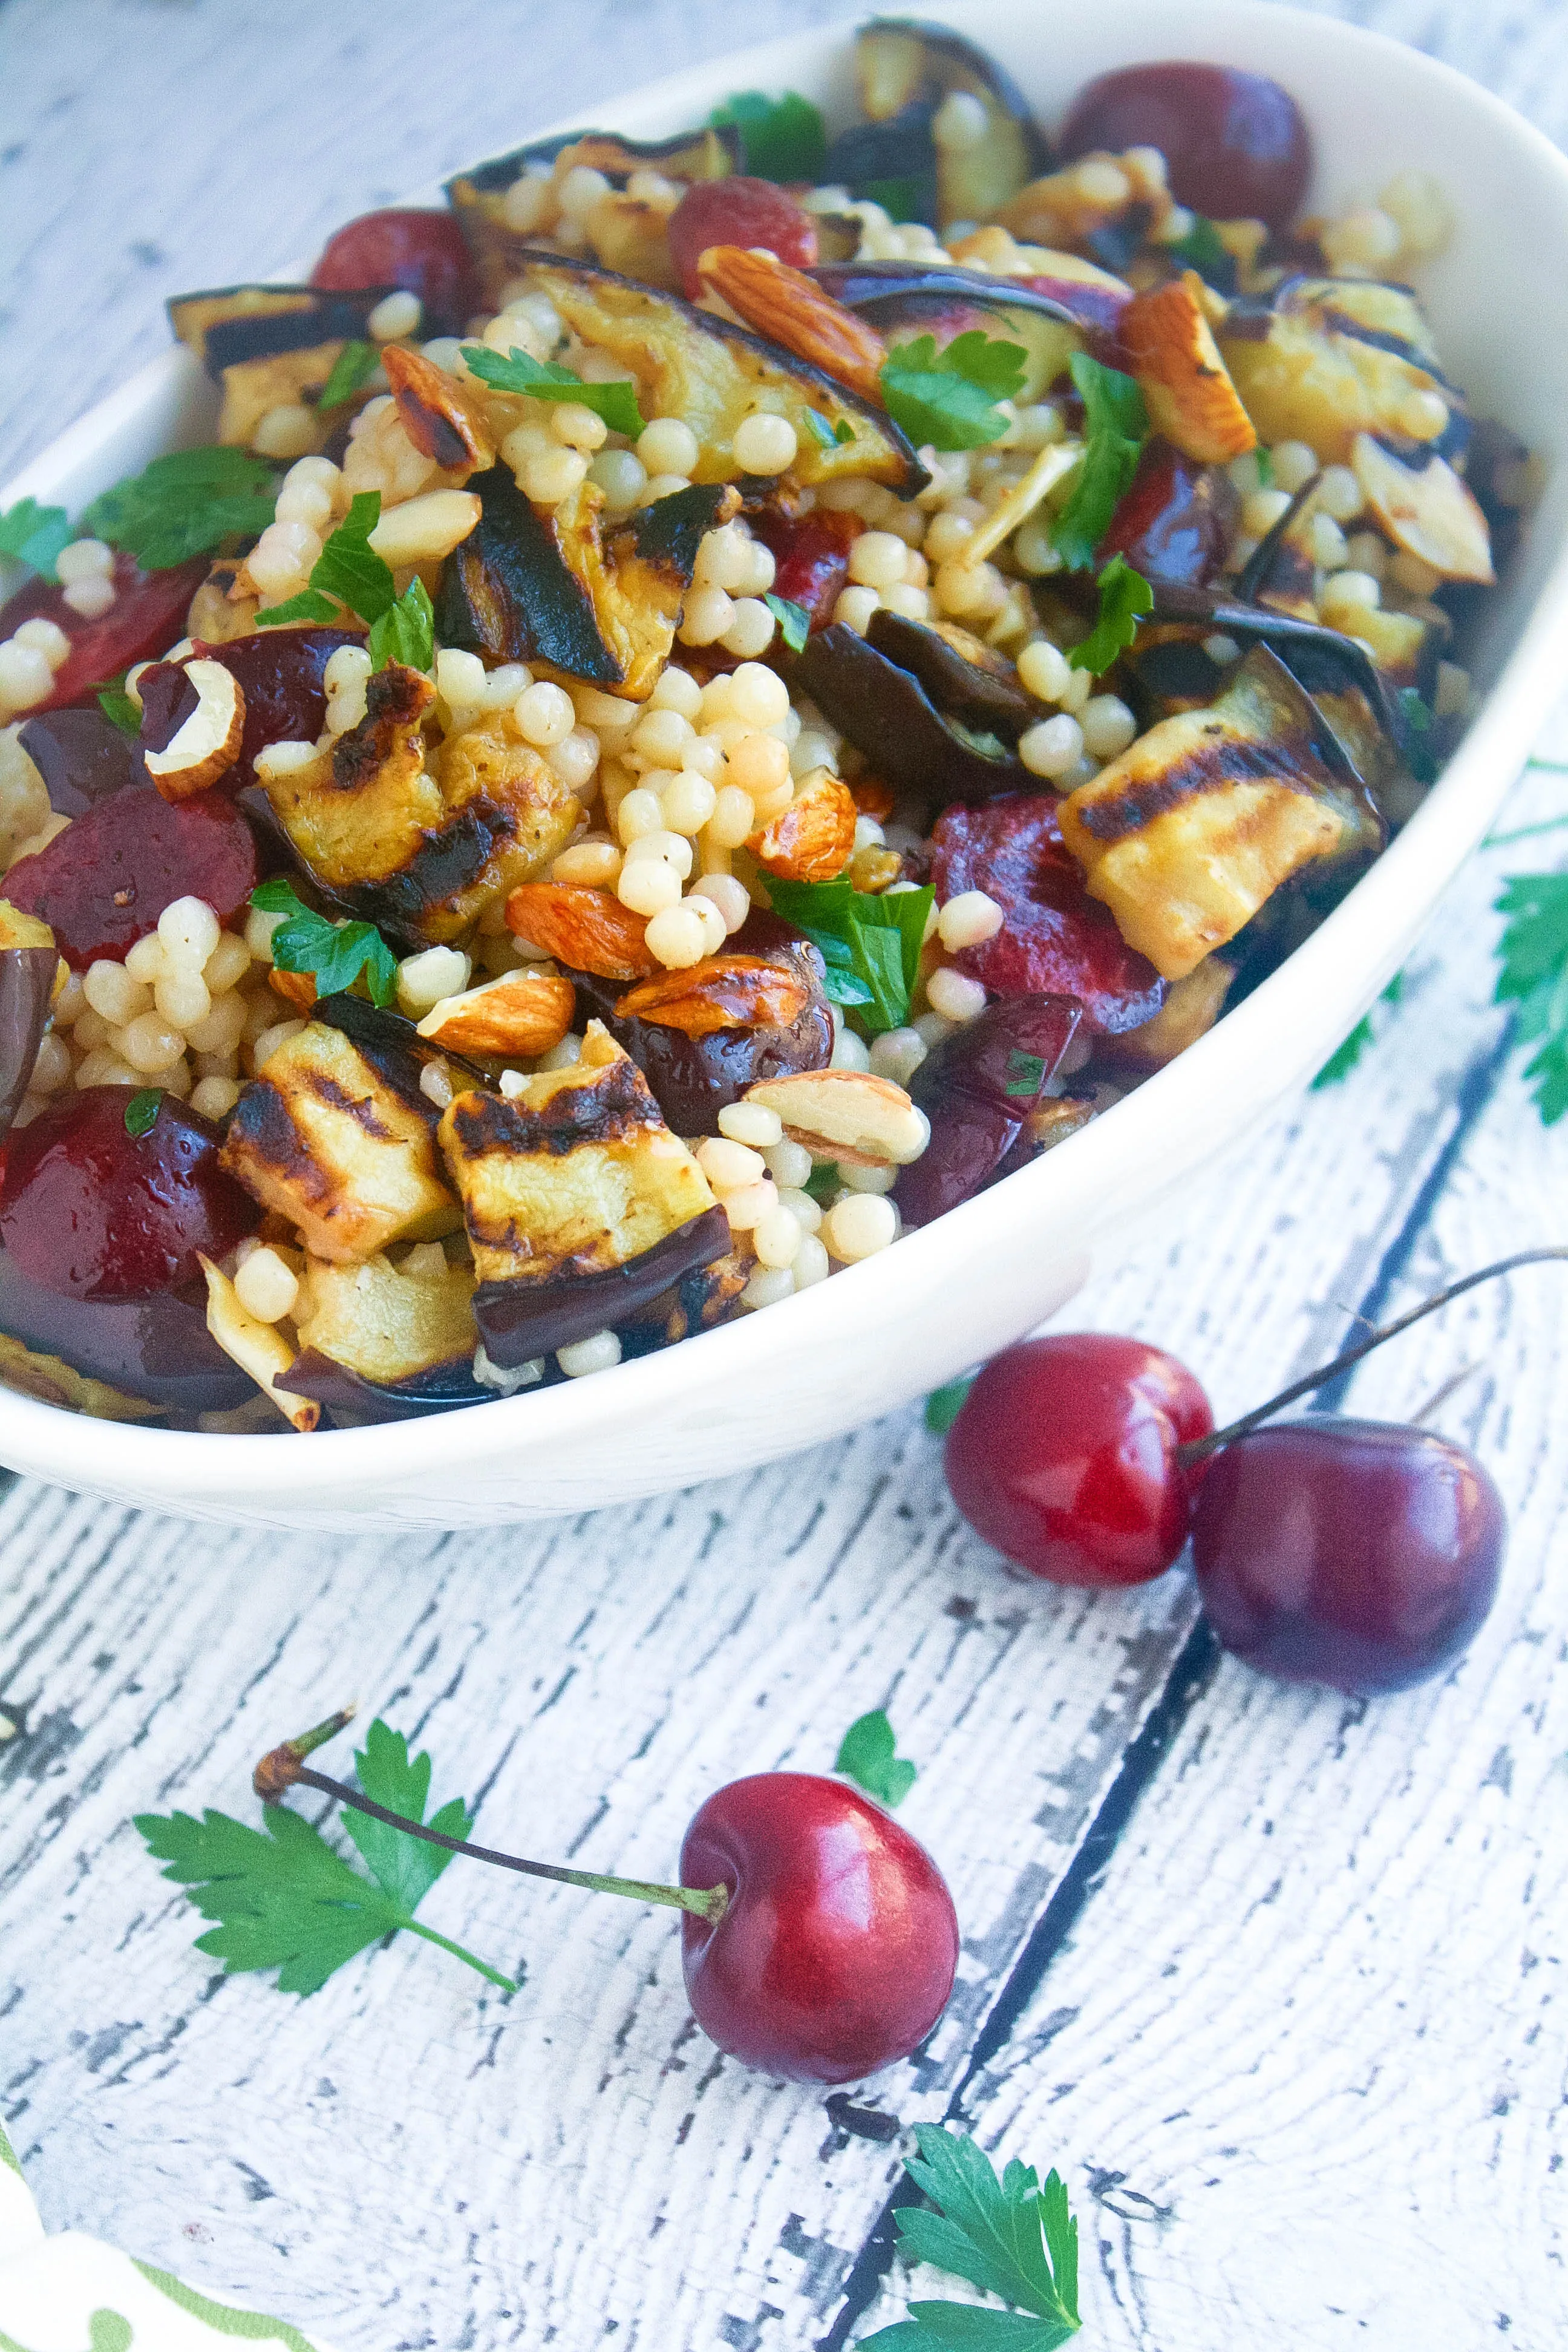 Grilled Eggplant, Cherries, and Couscous Salad is a nice dish to enjoy for Meatless Monday, or any day of the week! Grilled Eggplant, Cherries, and Couscous Salad is a great salad for the season.